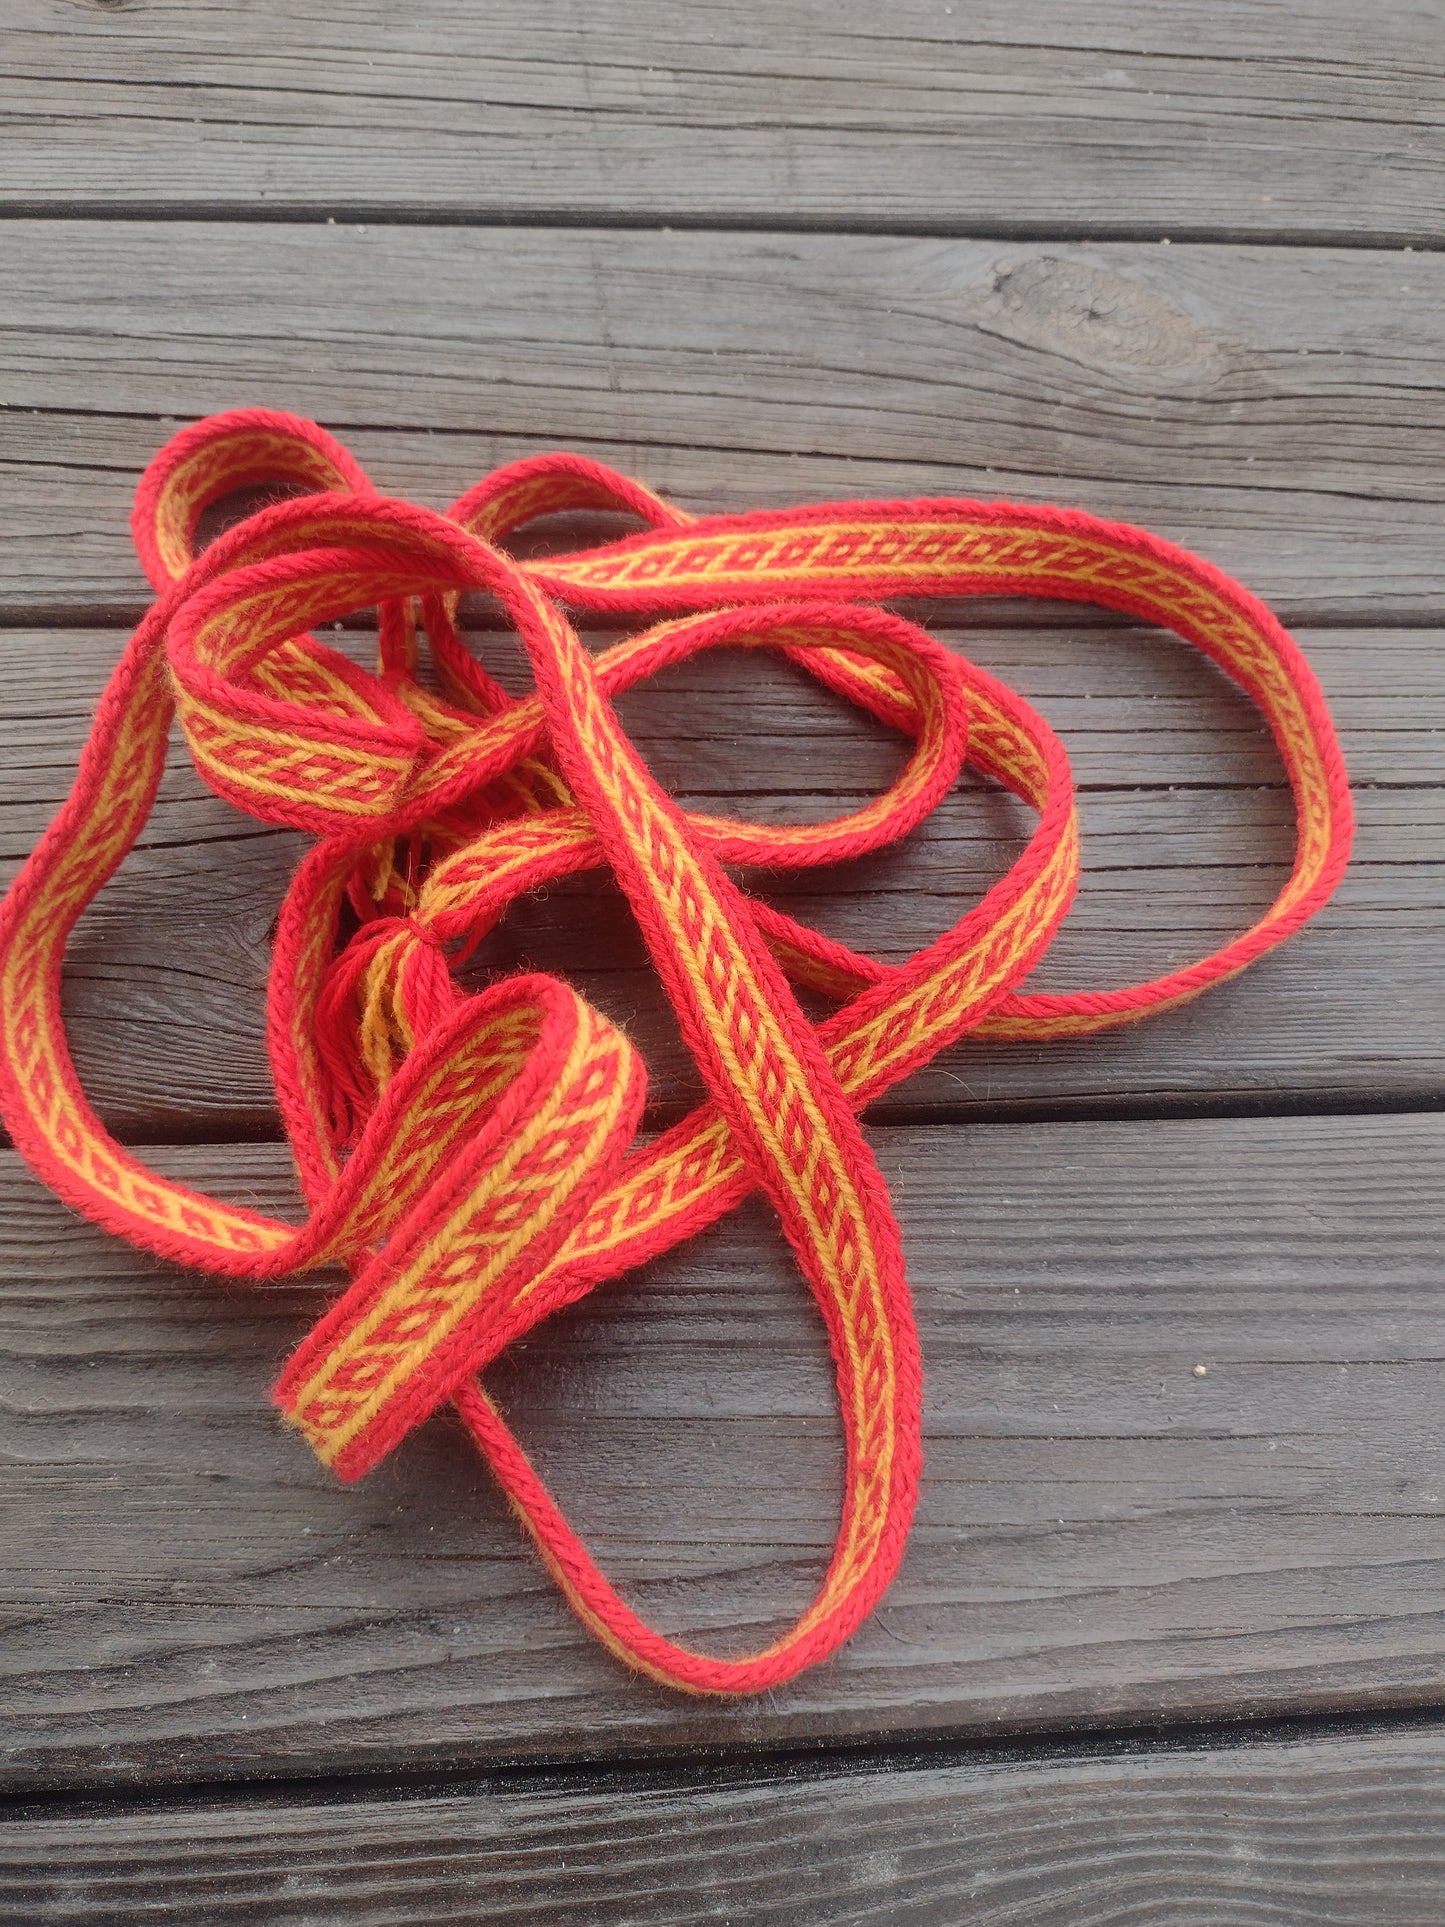 Red/yellow belt with Oseberg pattern from Viking age